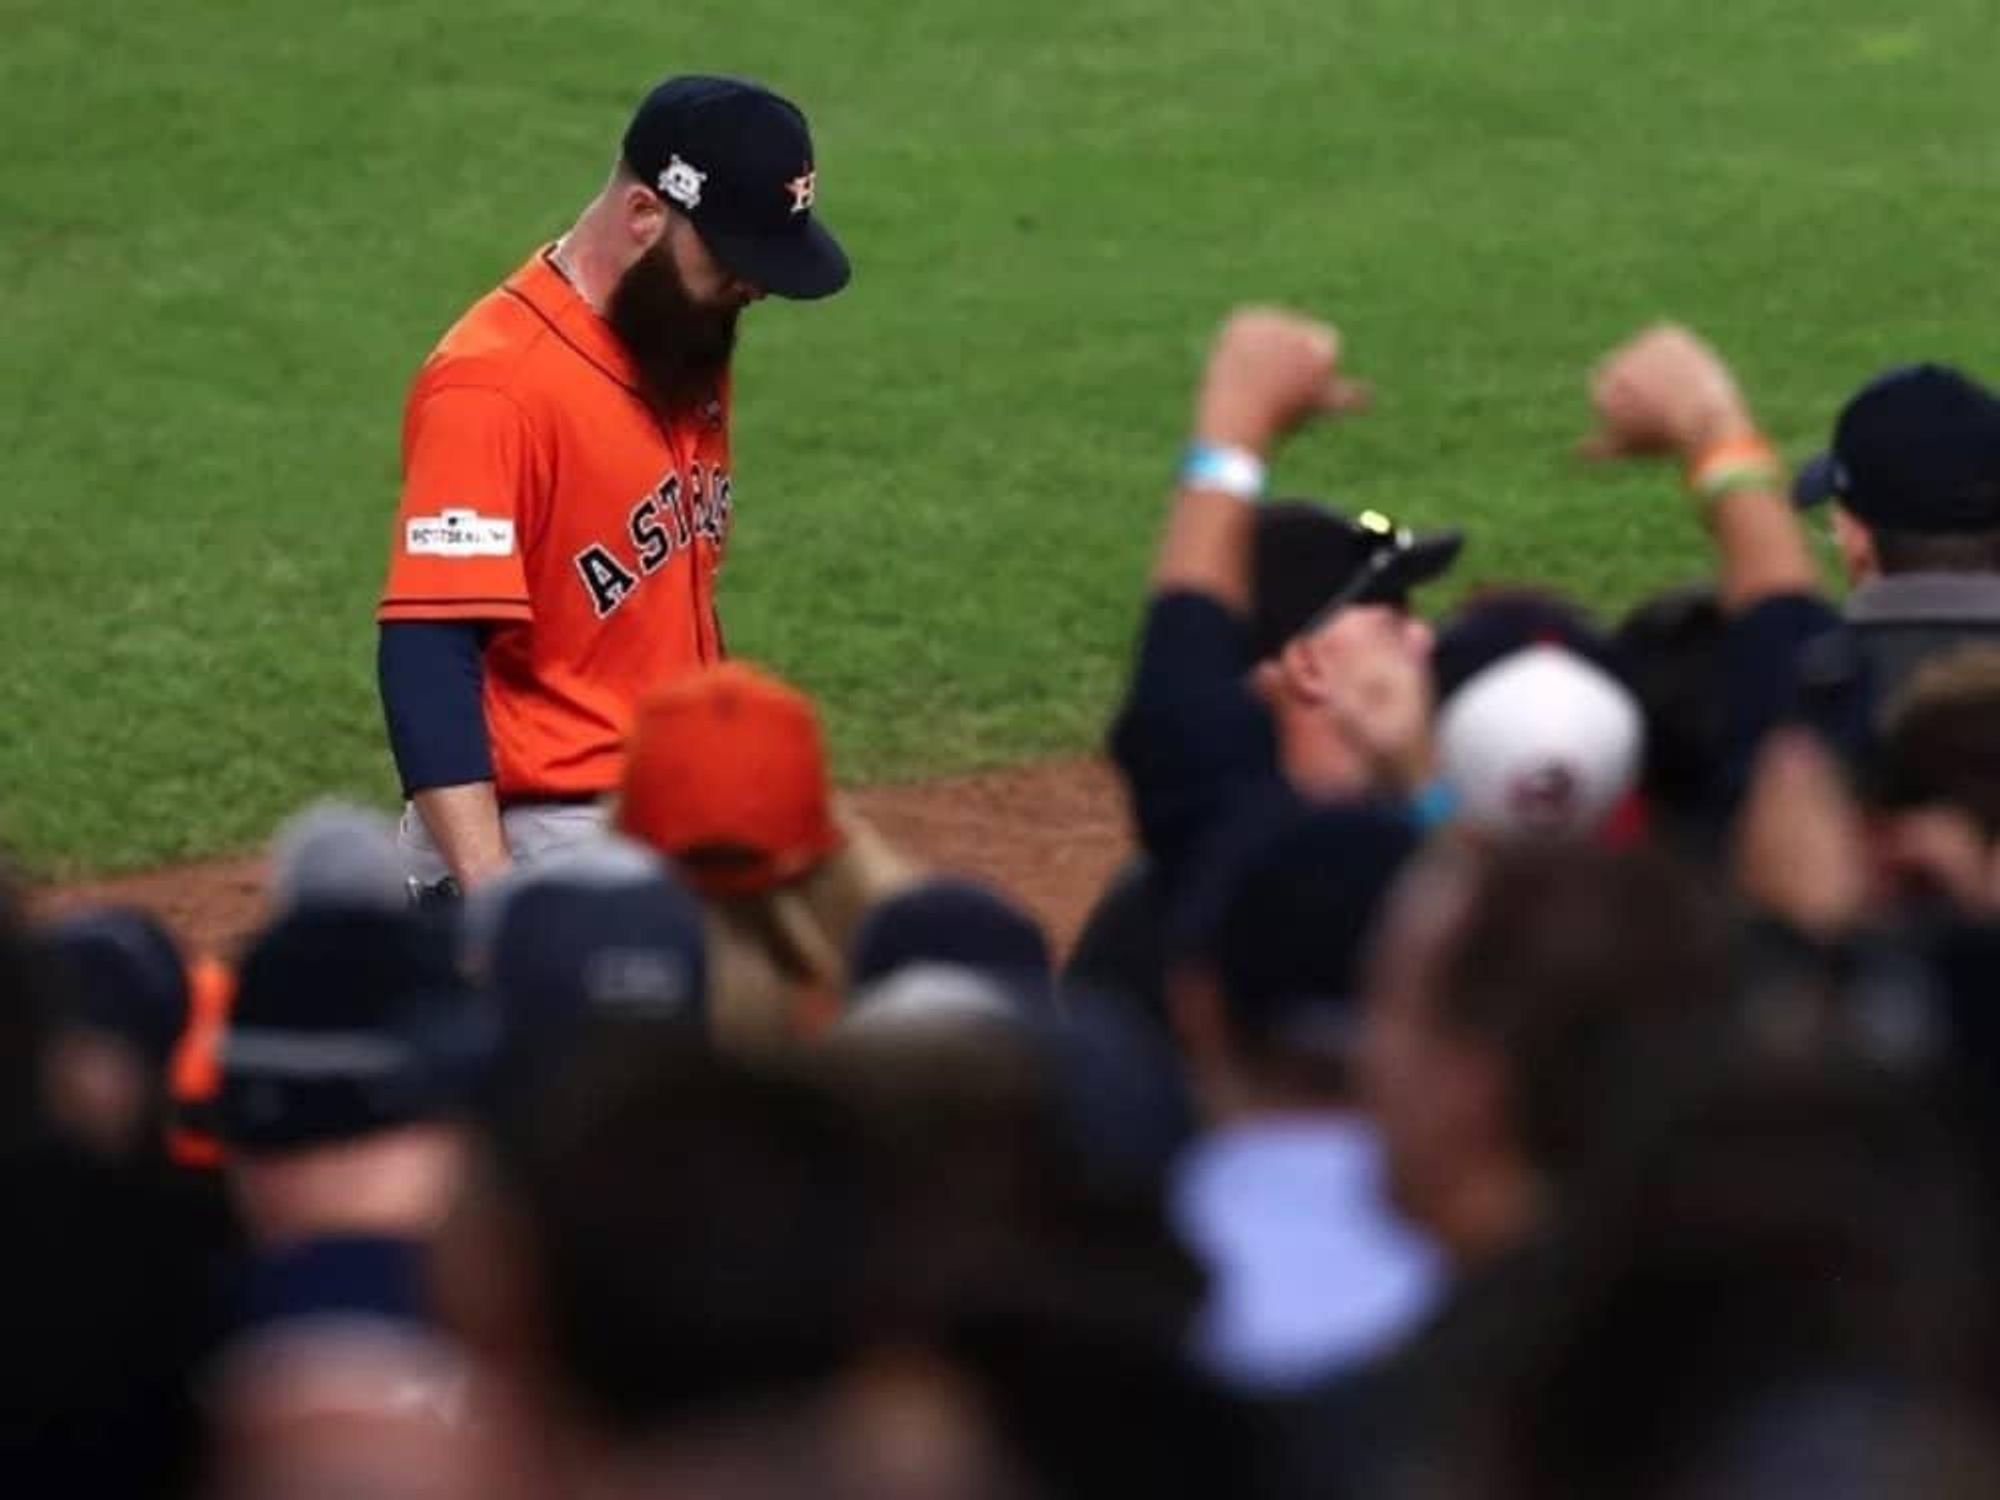 Astros pitcher Dallas Keuchel leaves game 5 of ALCS in loss to Yankees